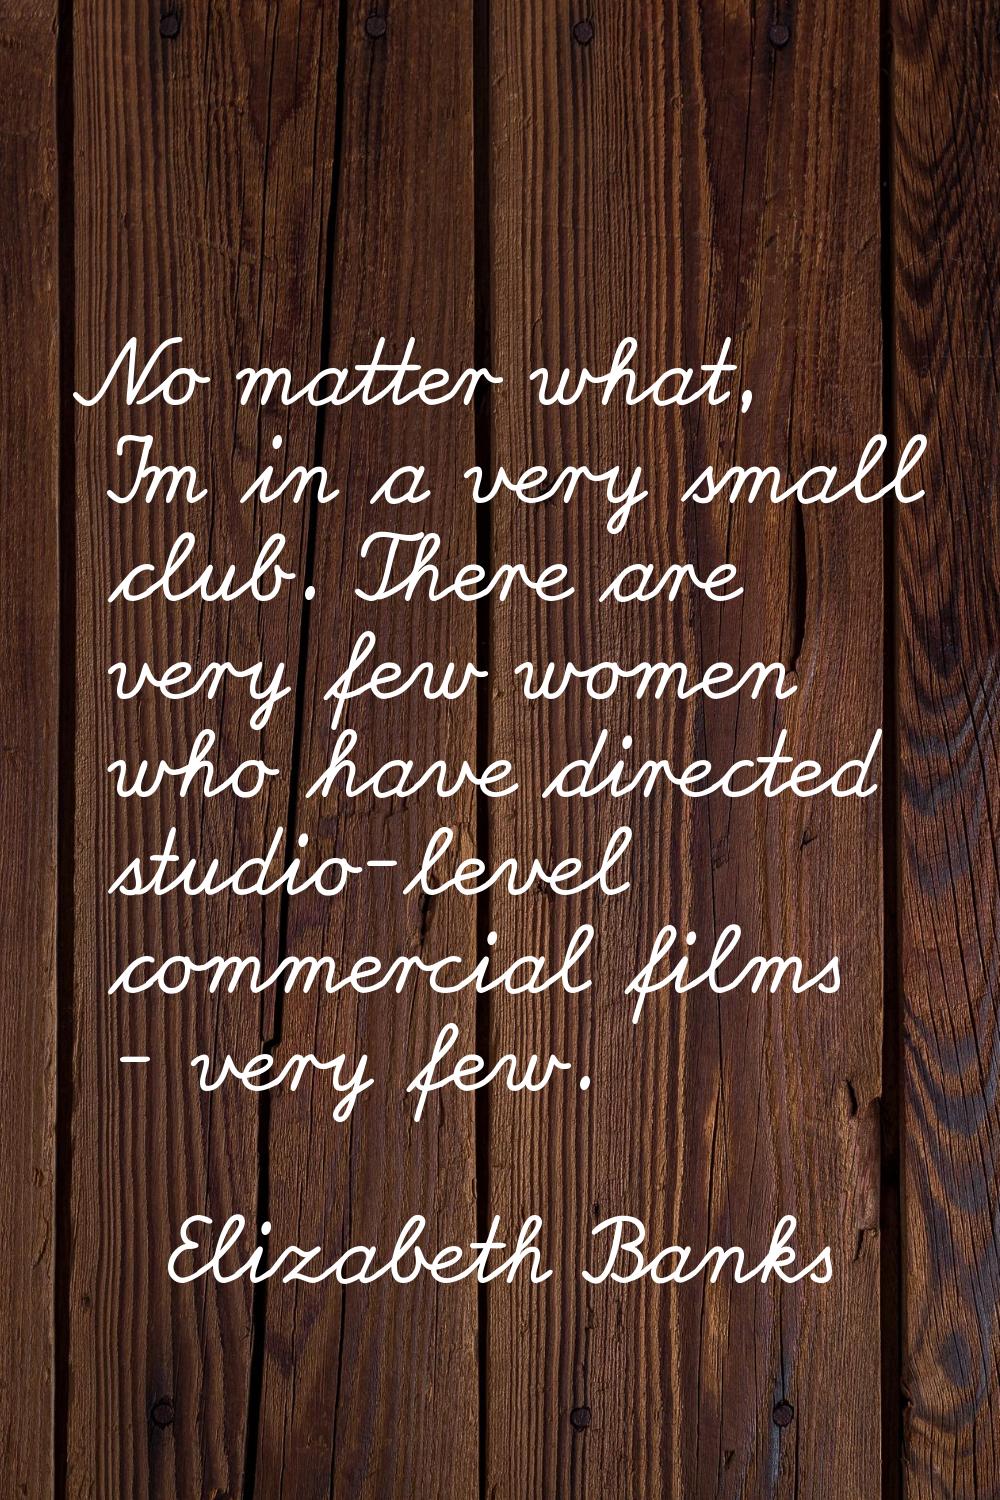 No matter what, I'm in a very small club. There are very few women who have directed studio-level c